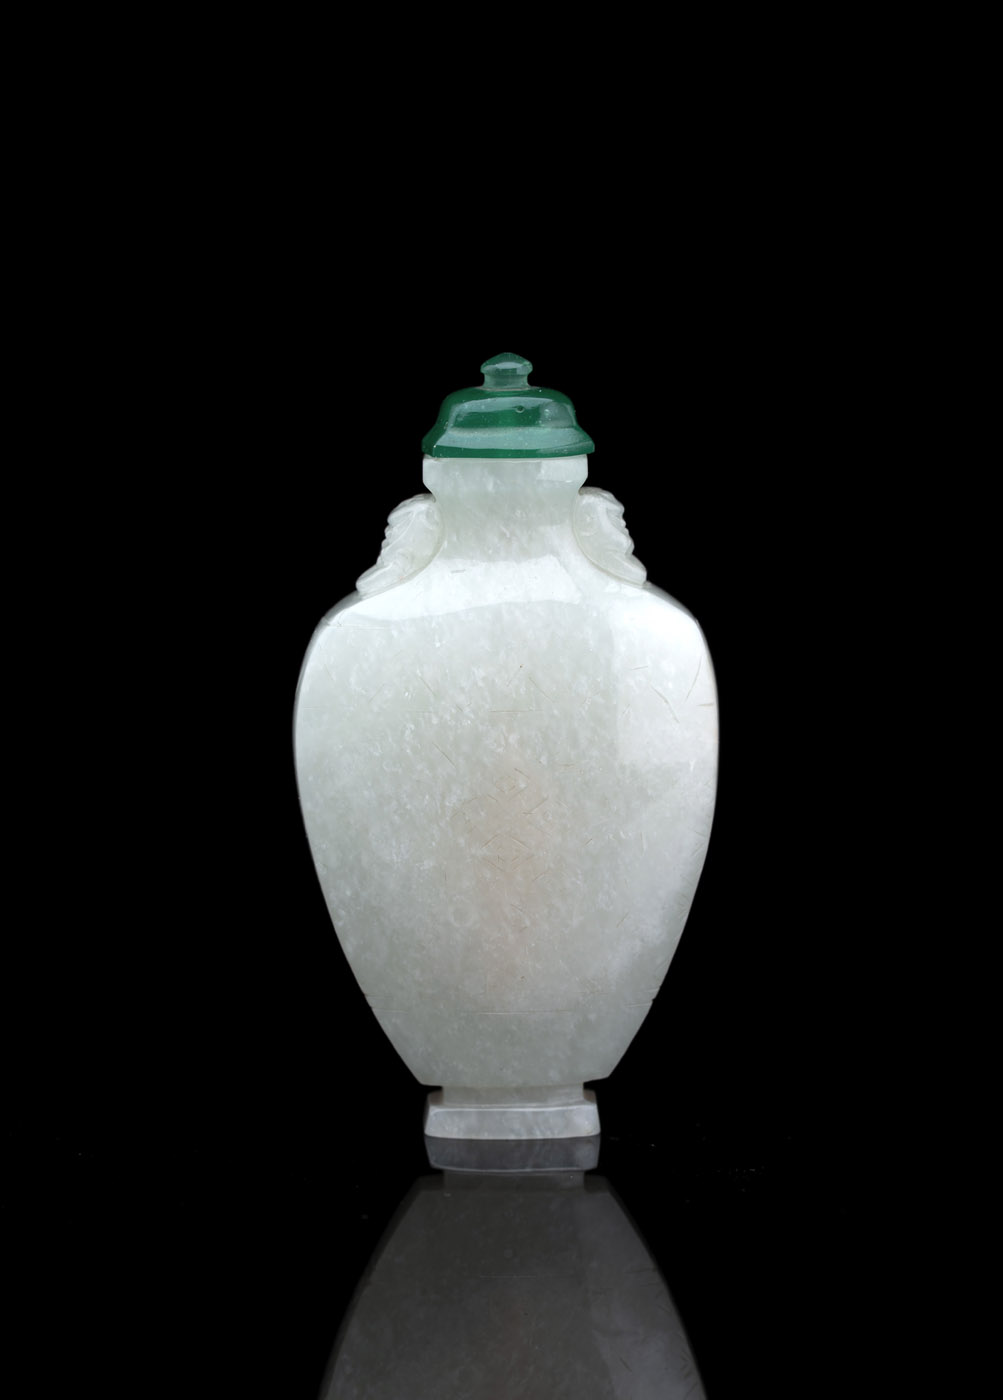 A WELL CARVED LIGHT GREEN JADE SNUFFBOTTLE WITH A GREEN GLASS STOPPER